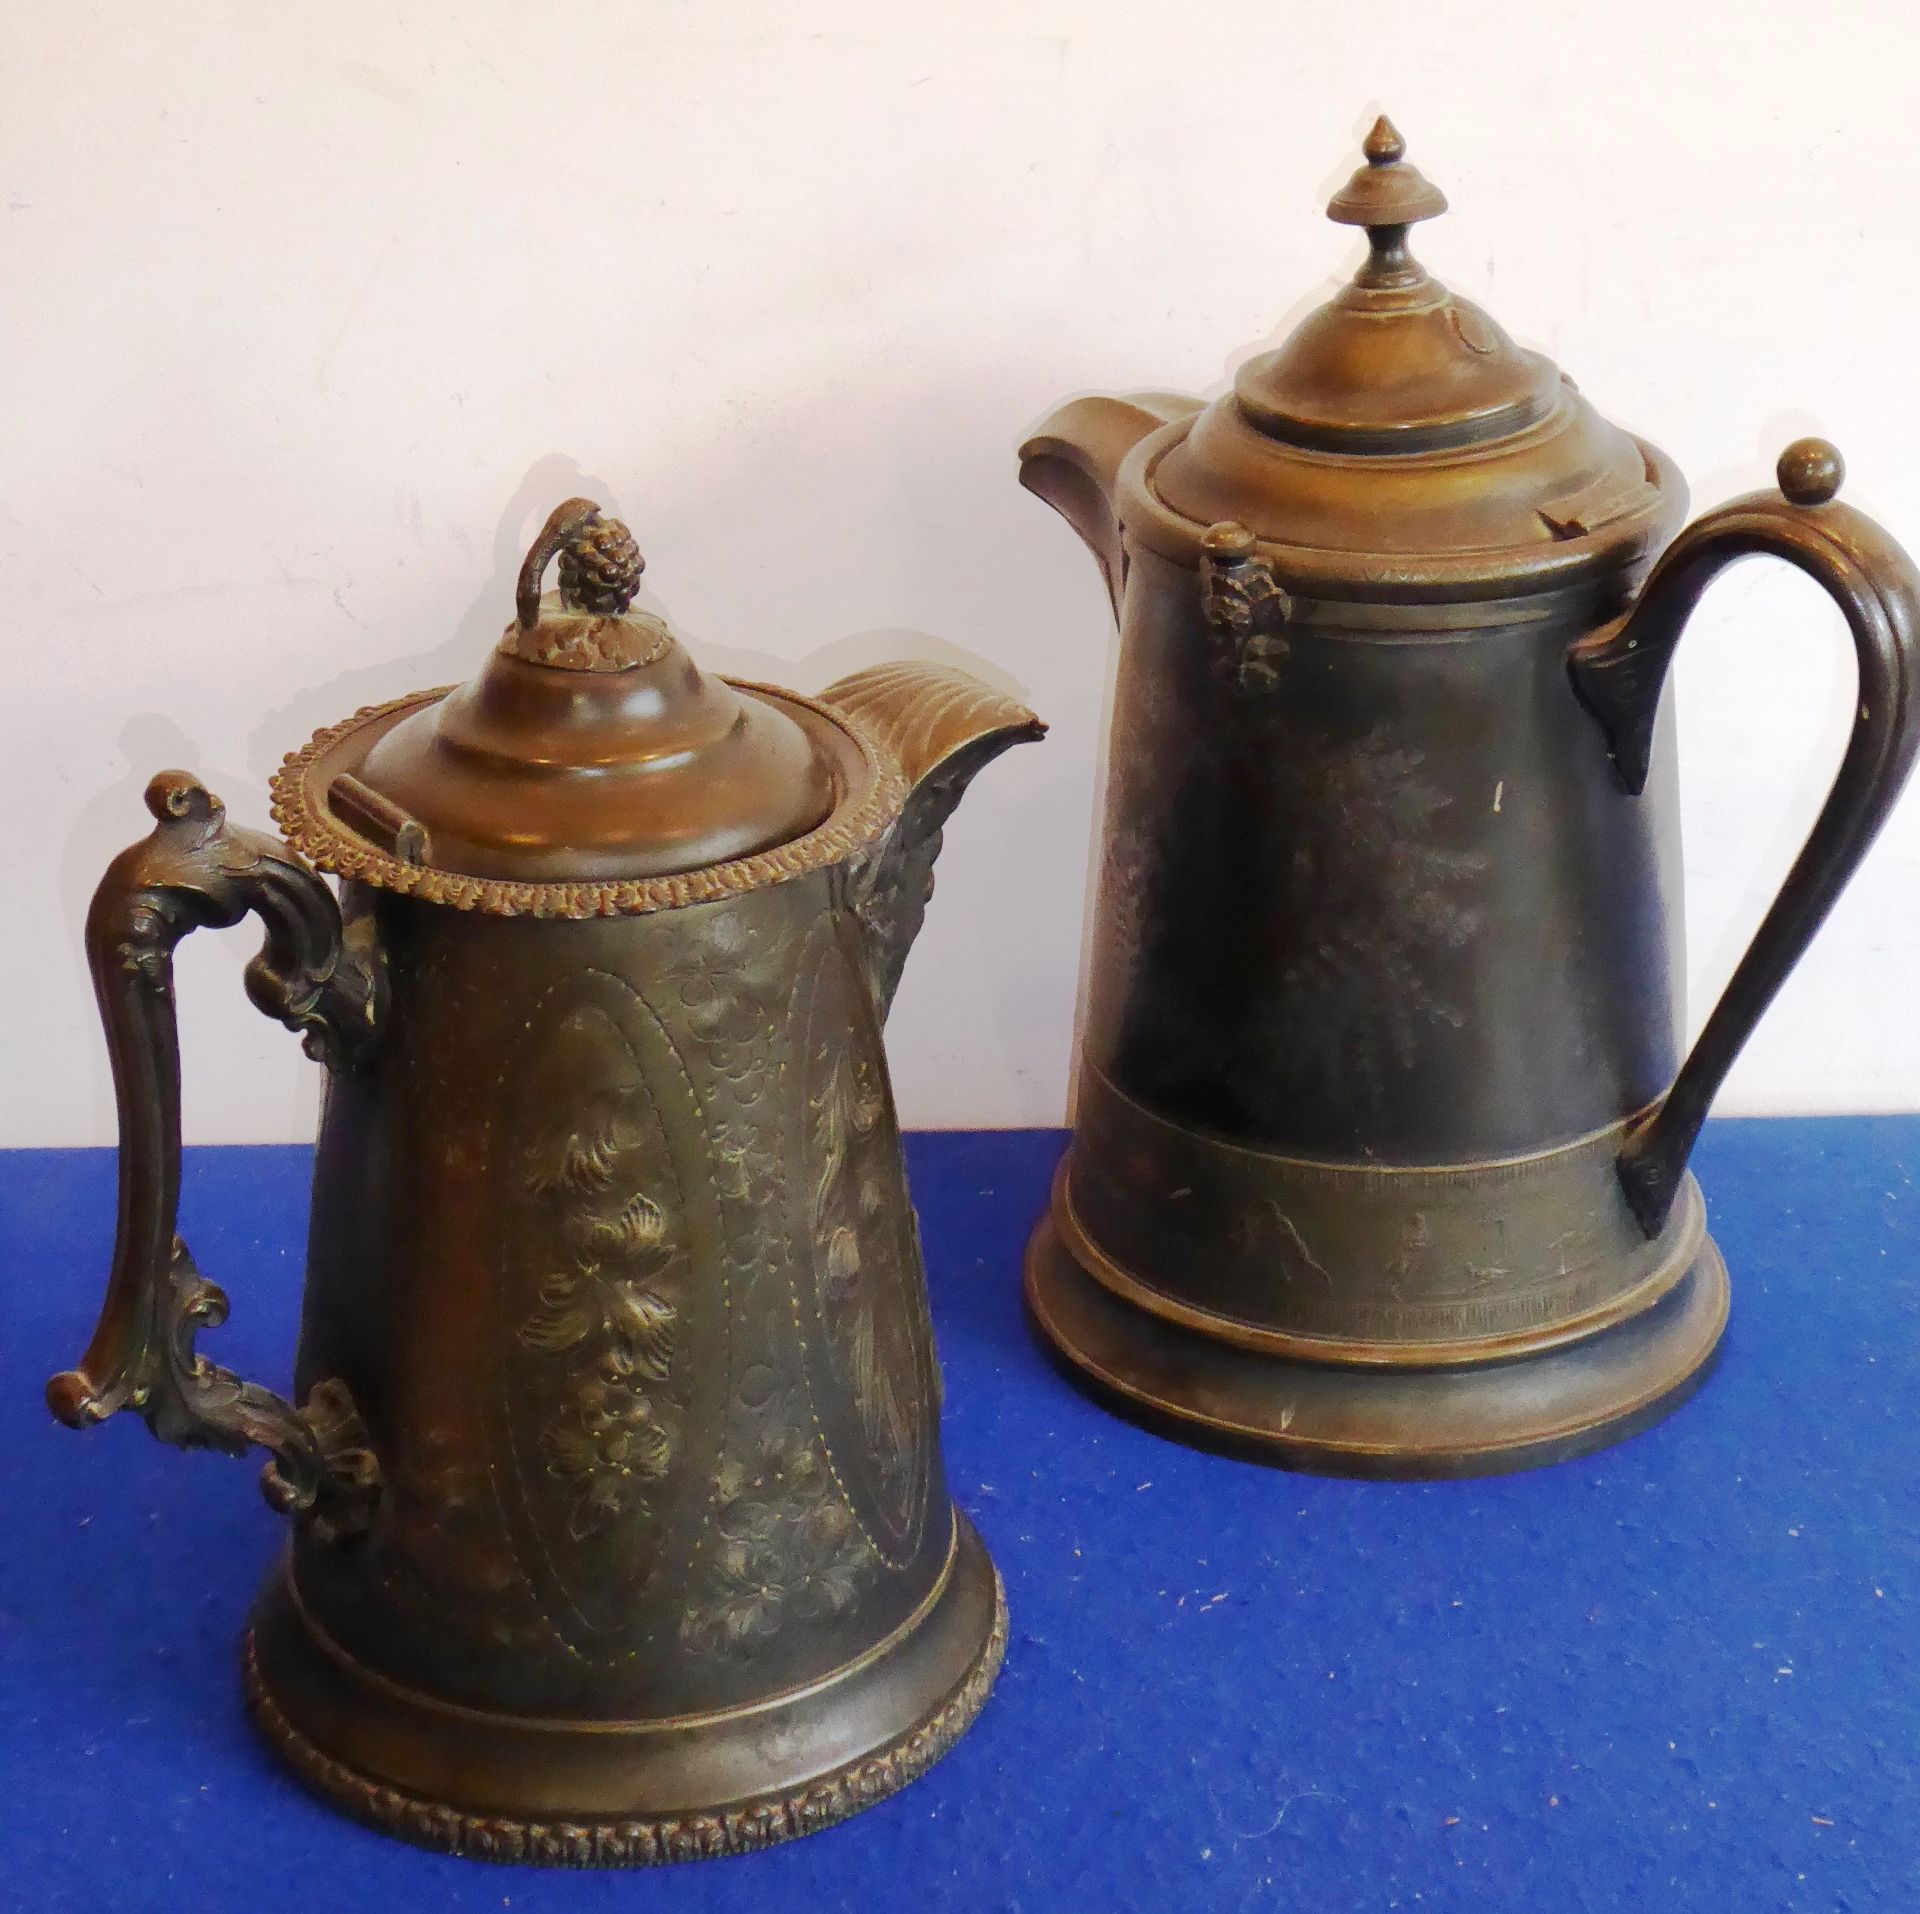 Two 19th century pewter hot water jugs (one ceramic lined);